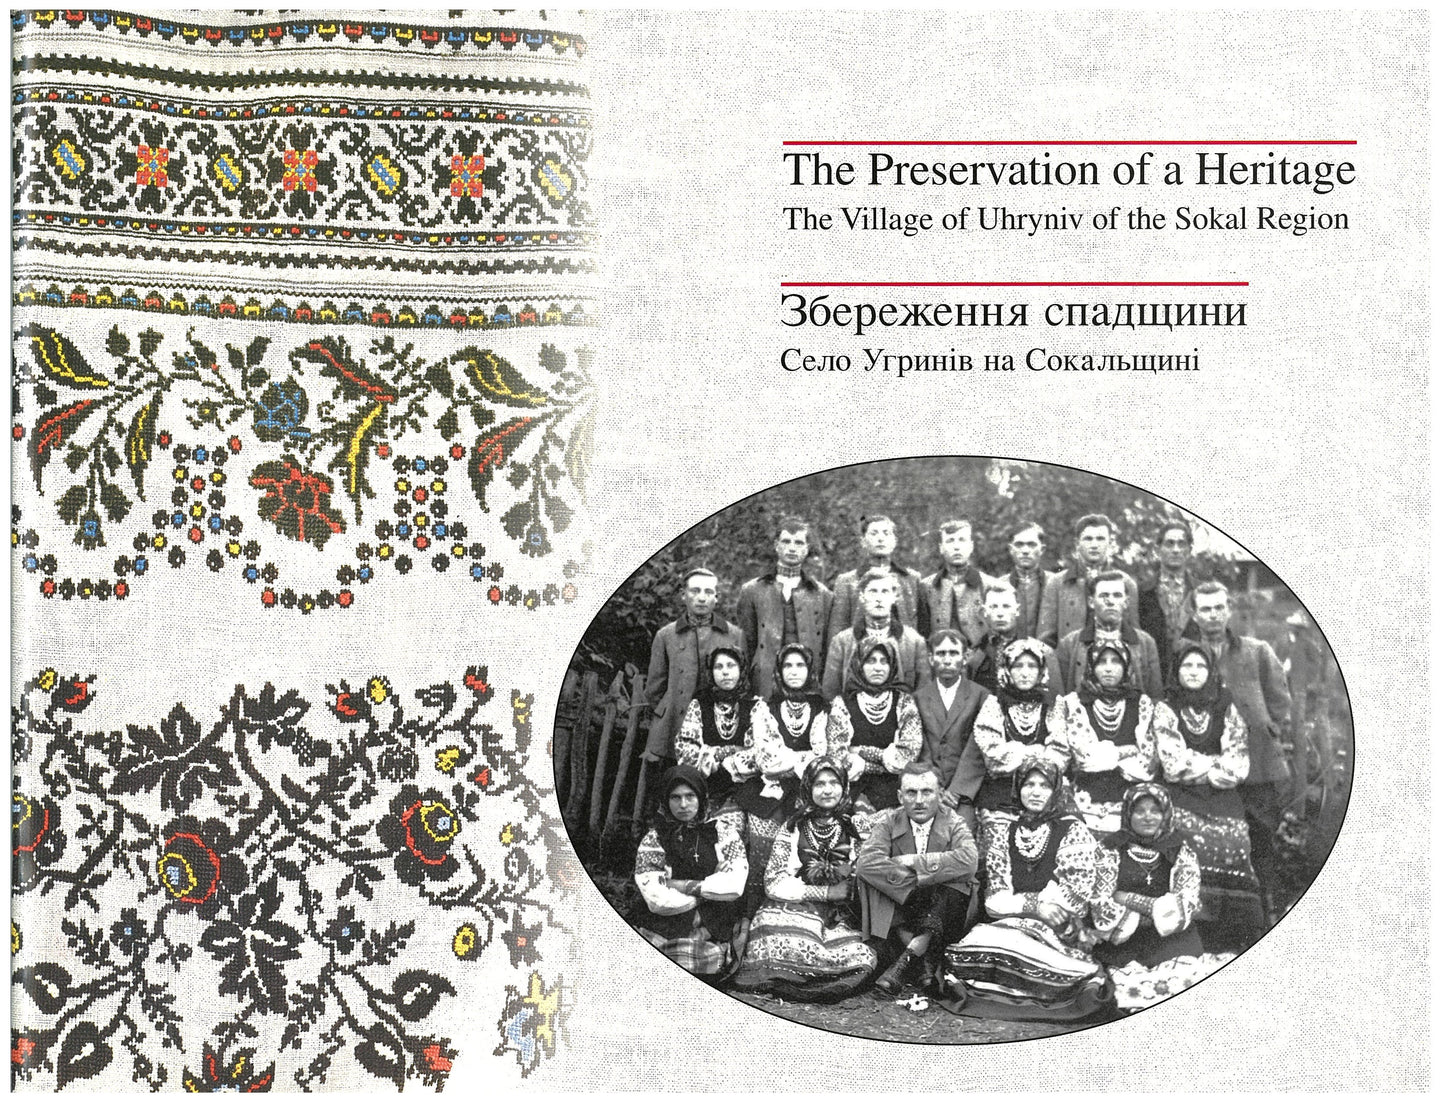 The Preservation of a Heritage: The Village of Uhryniv of the Sokal Region